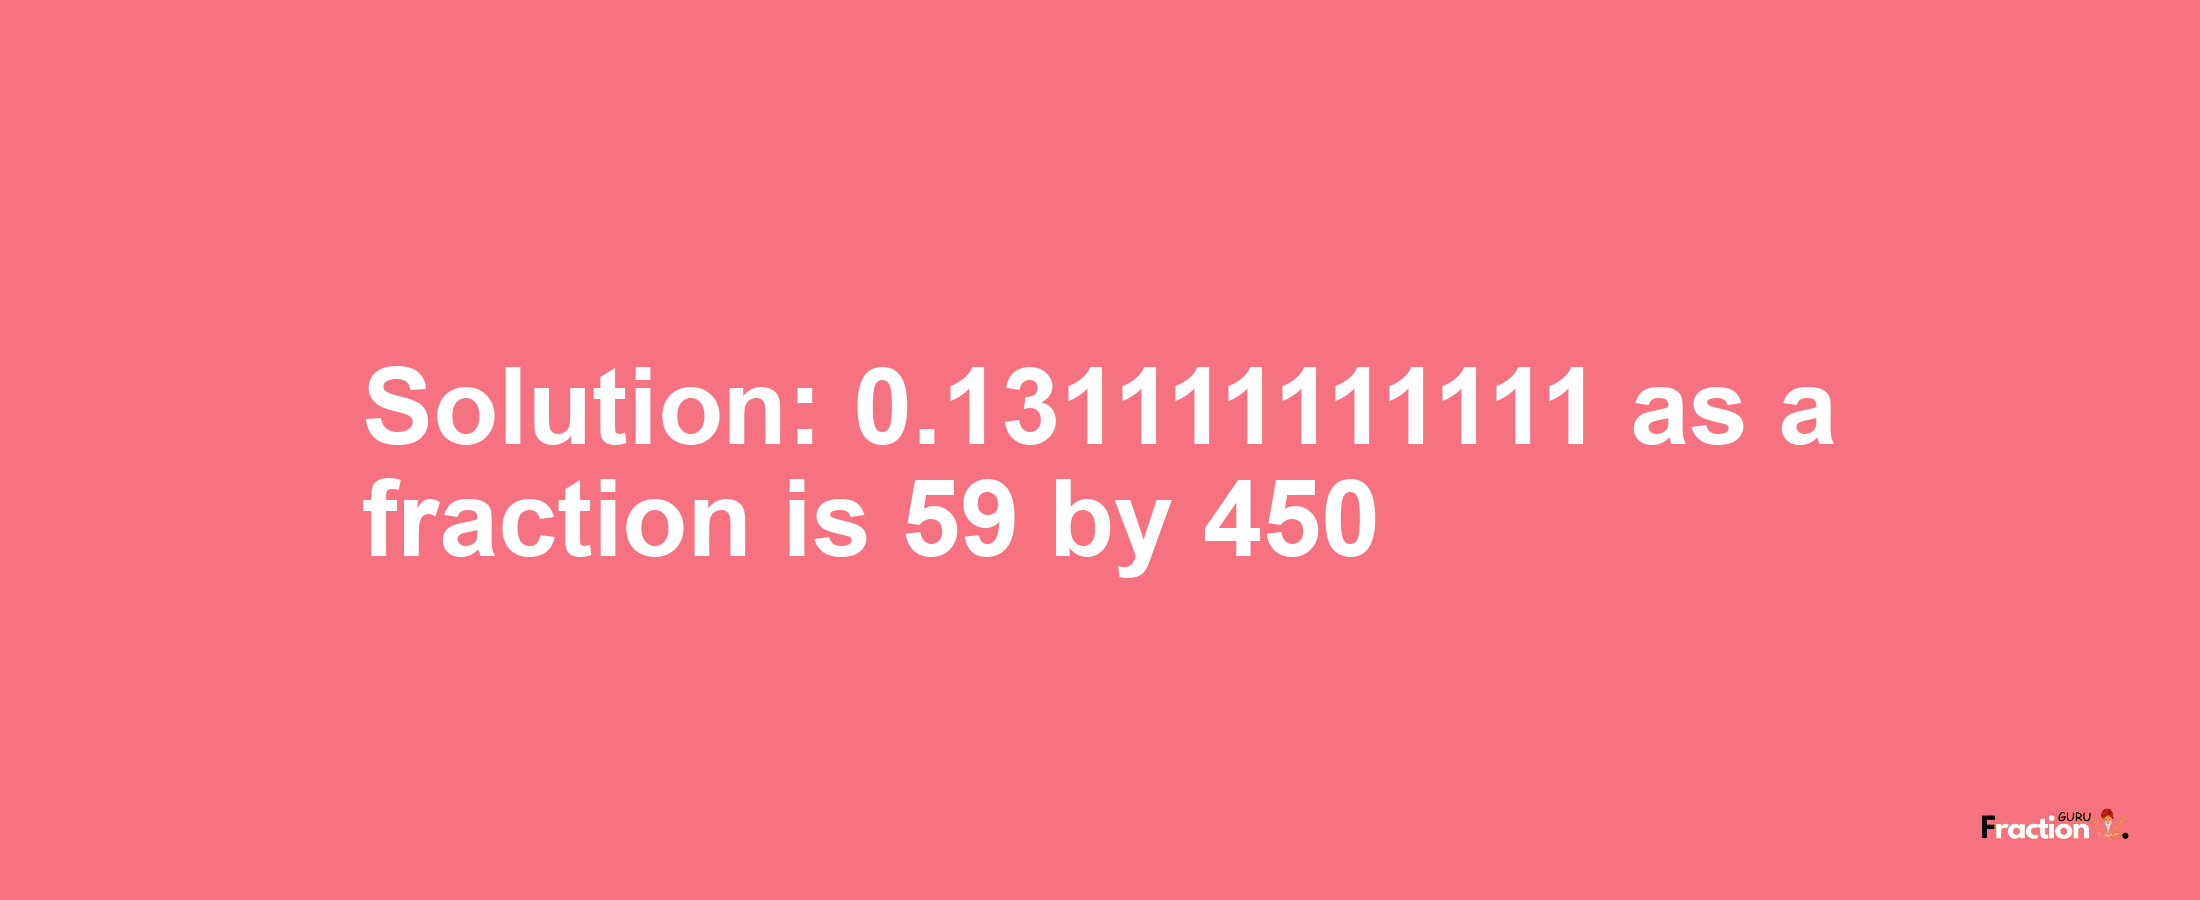 Solution:0.131111111111 as a fraction is 59/450